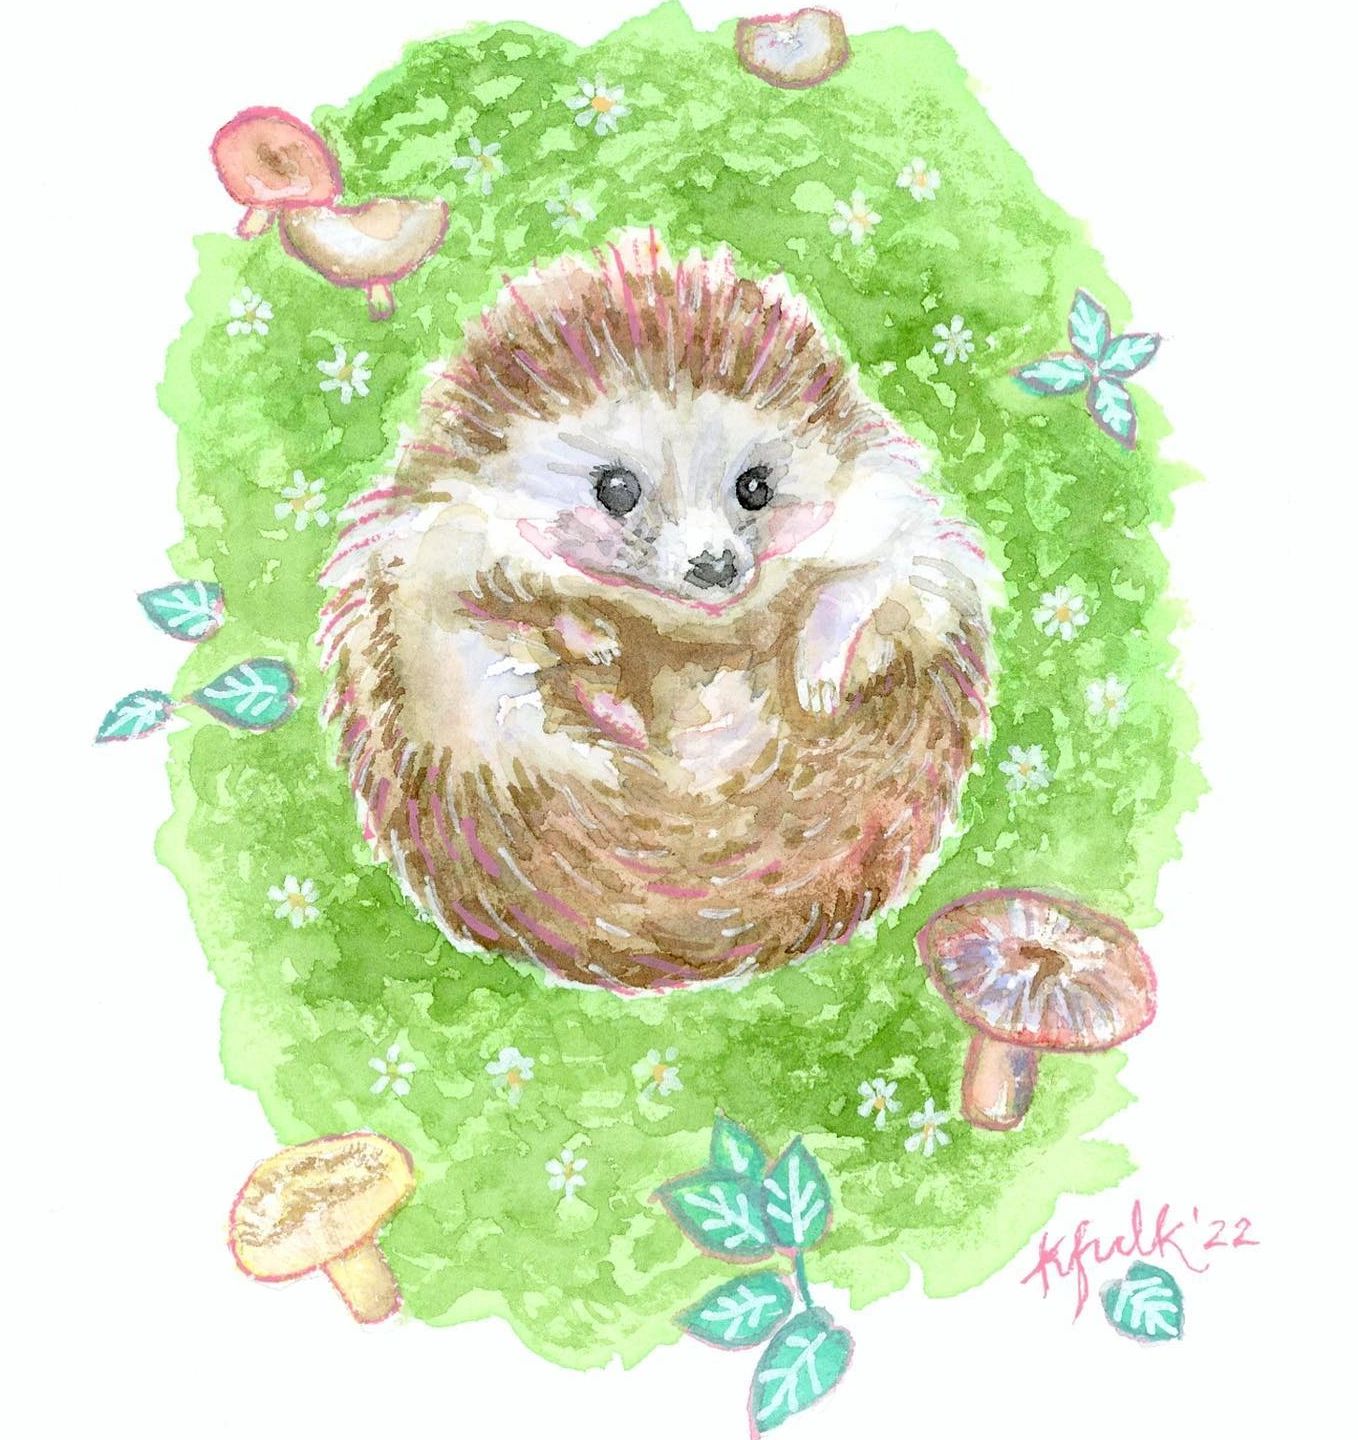 A watercolor painting of a baby hedgehog laying on grass.